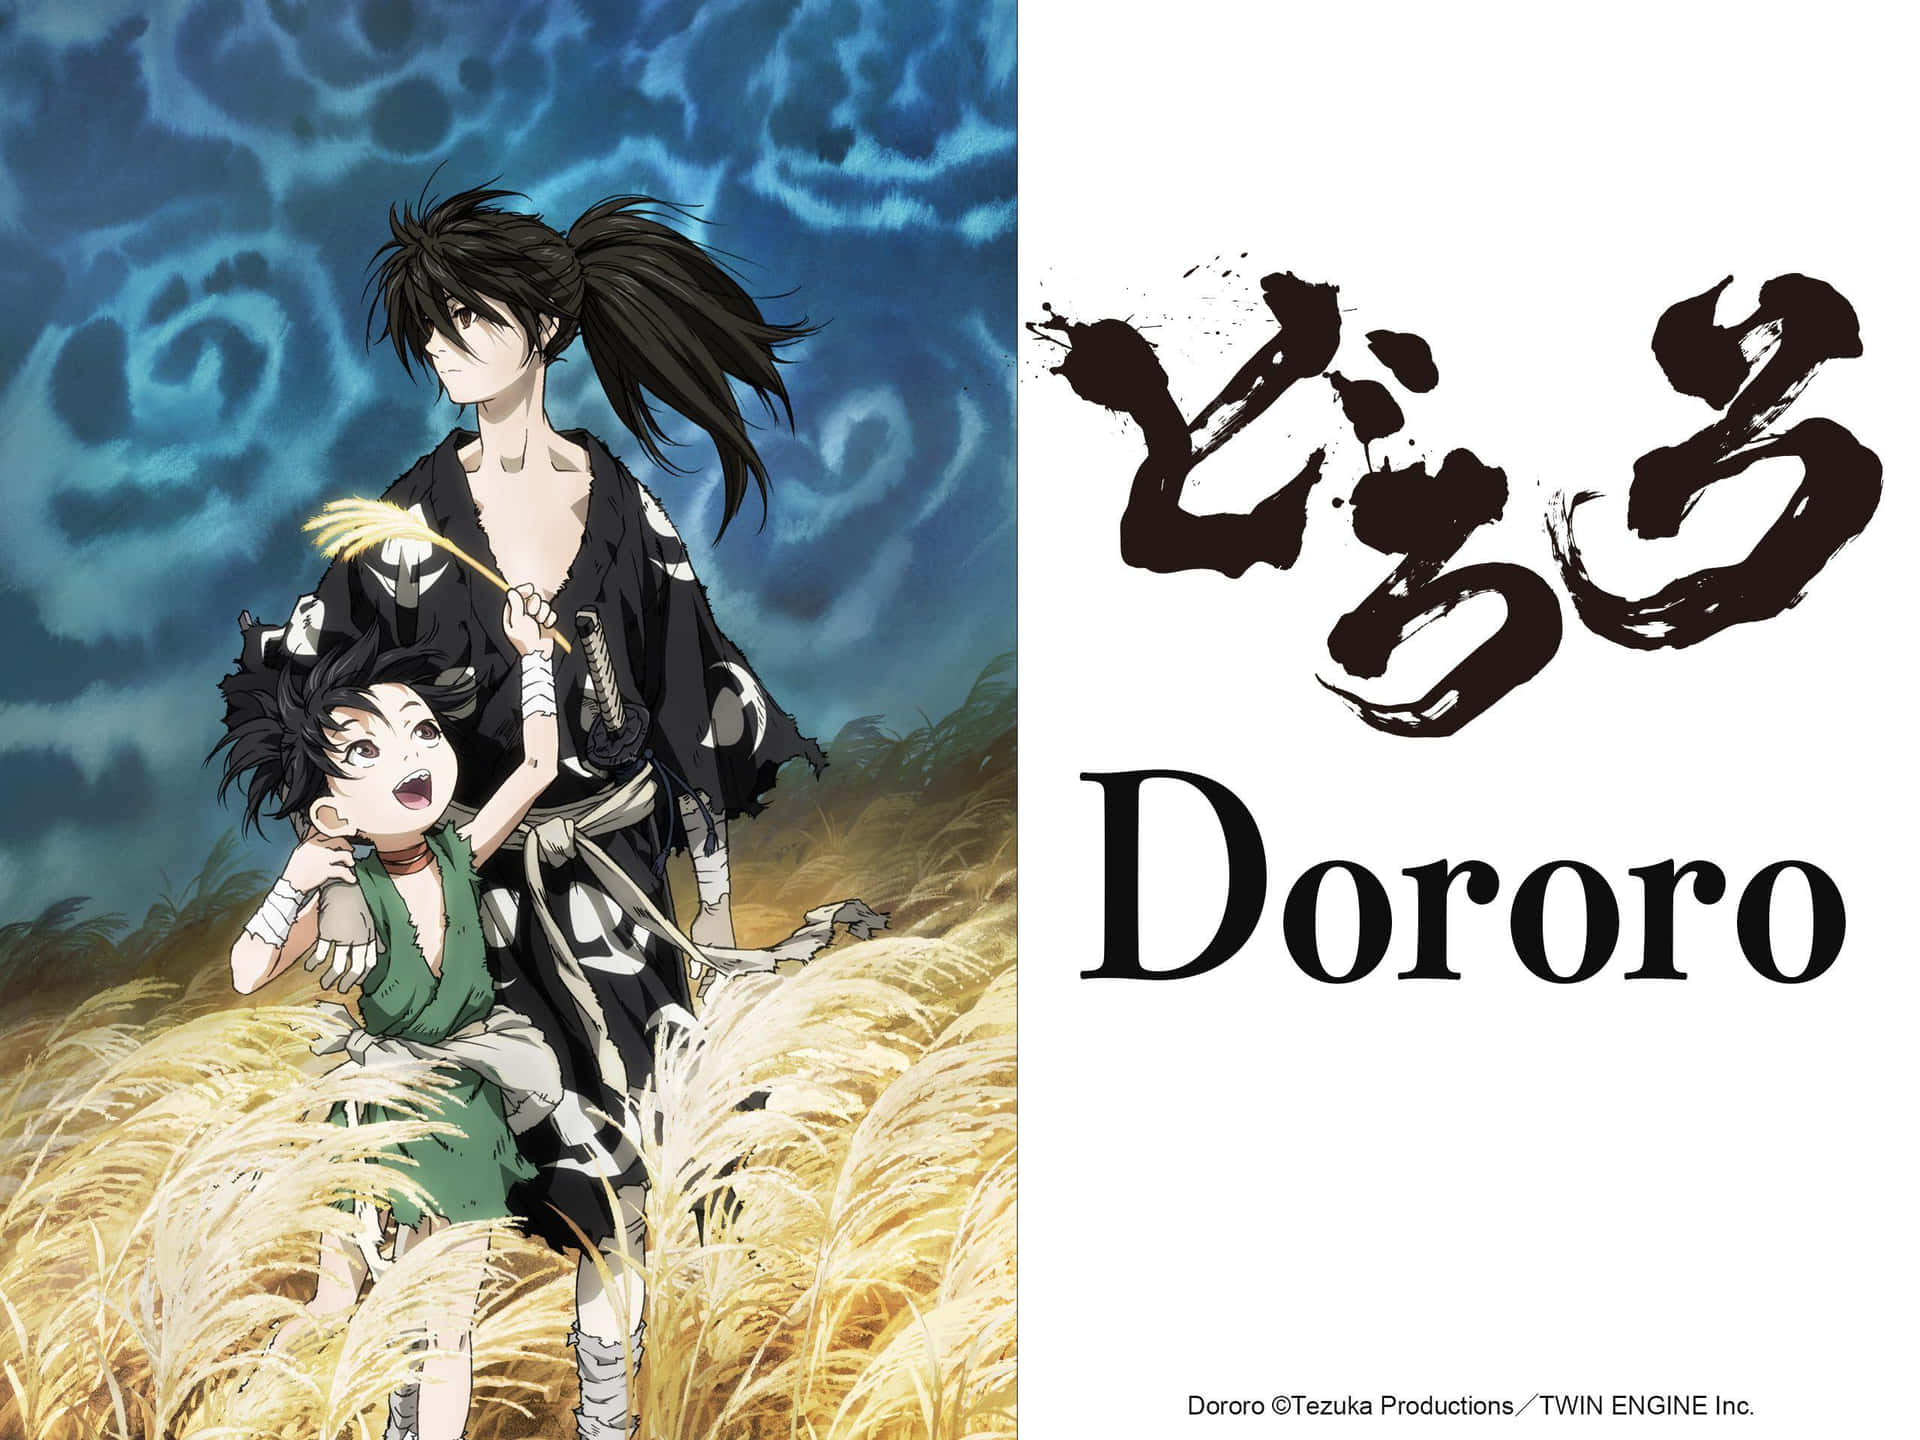 A shot of the titular protagonist, Dororo, exploring a mysterious world.